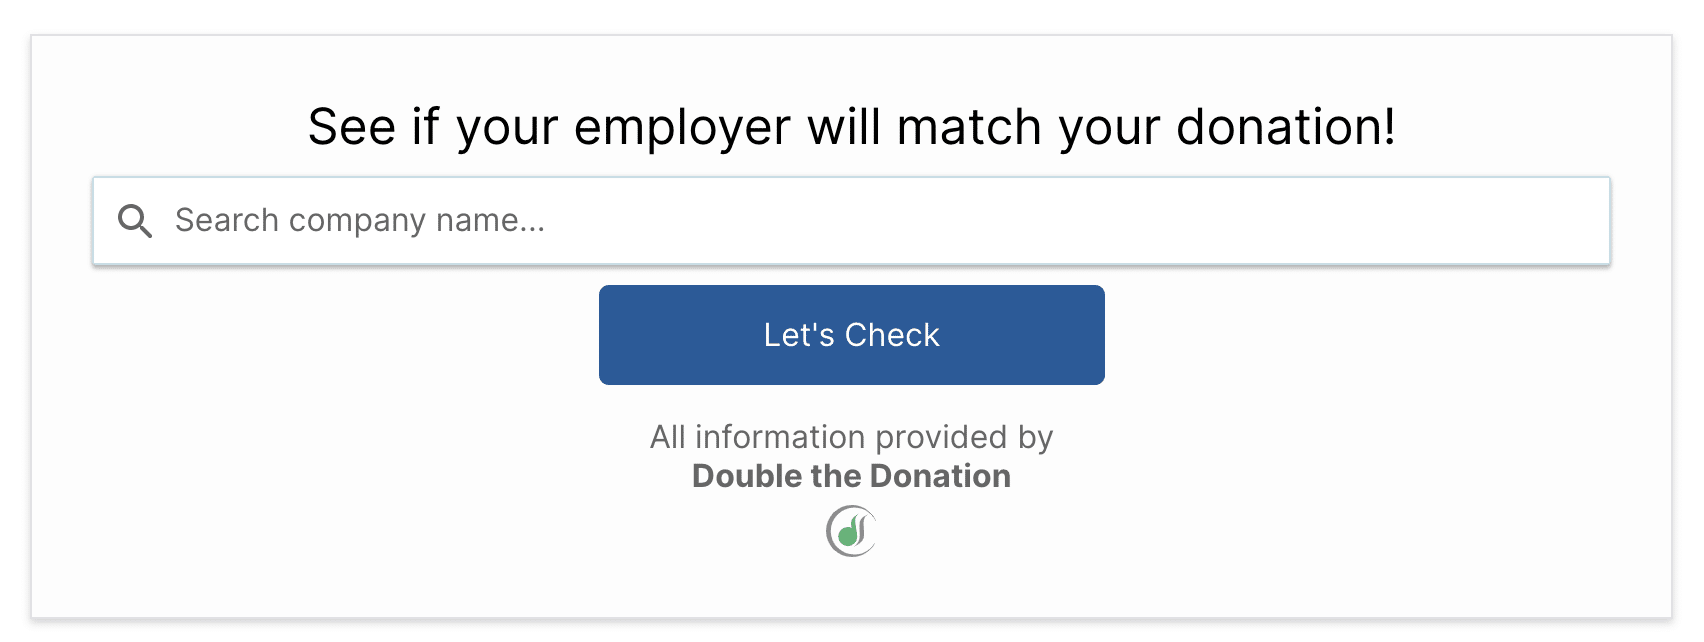 DoubleTheDonation search tool